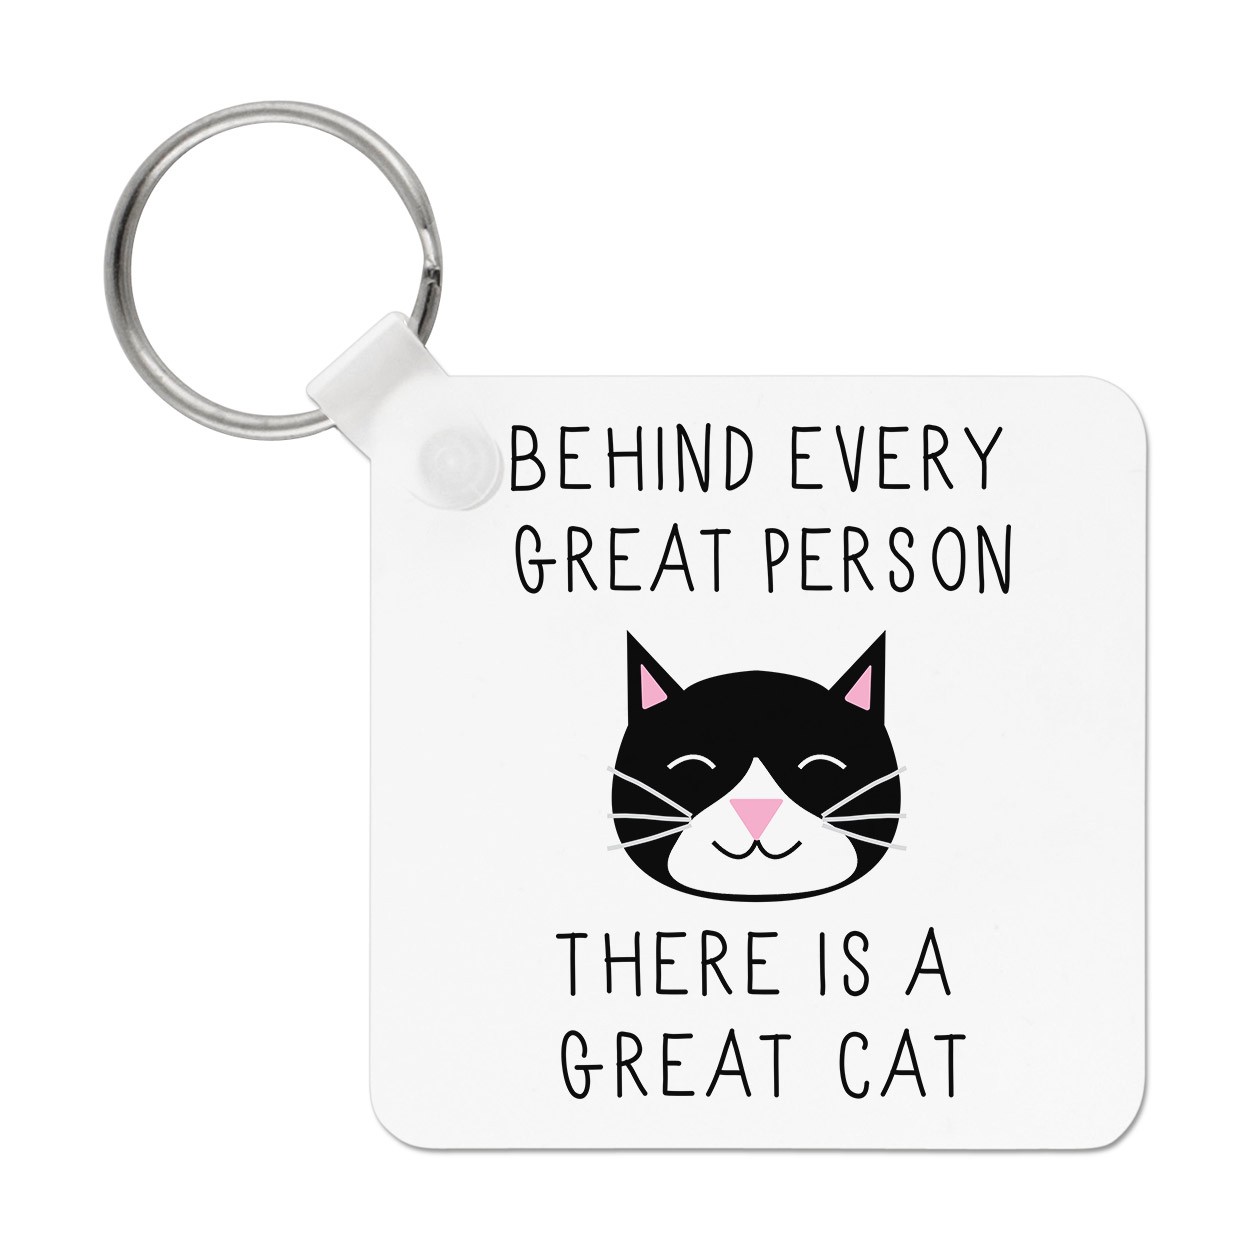 Behind Every Great Person Is A Great Cat Keyring Key Chain